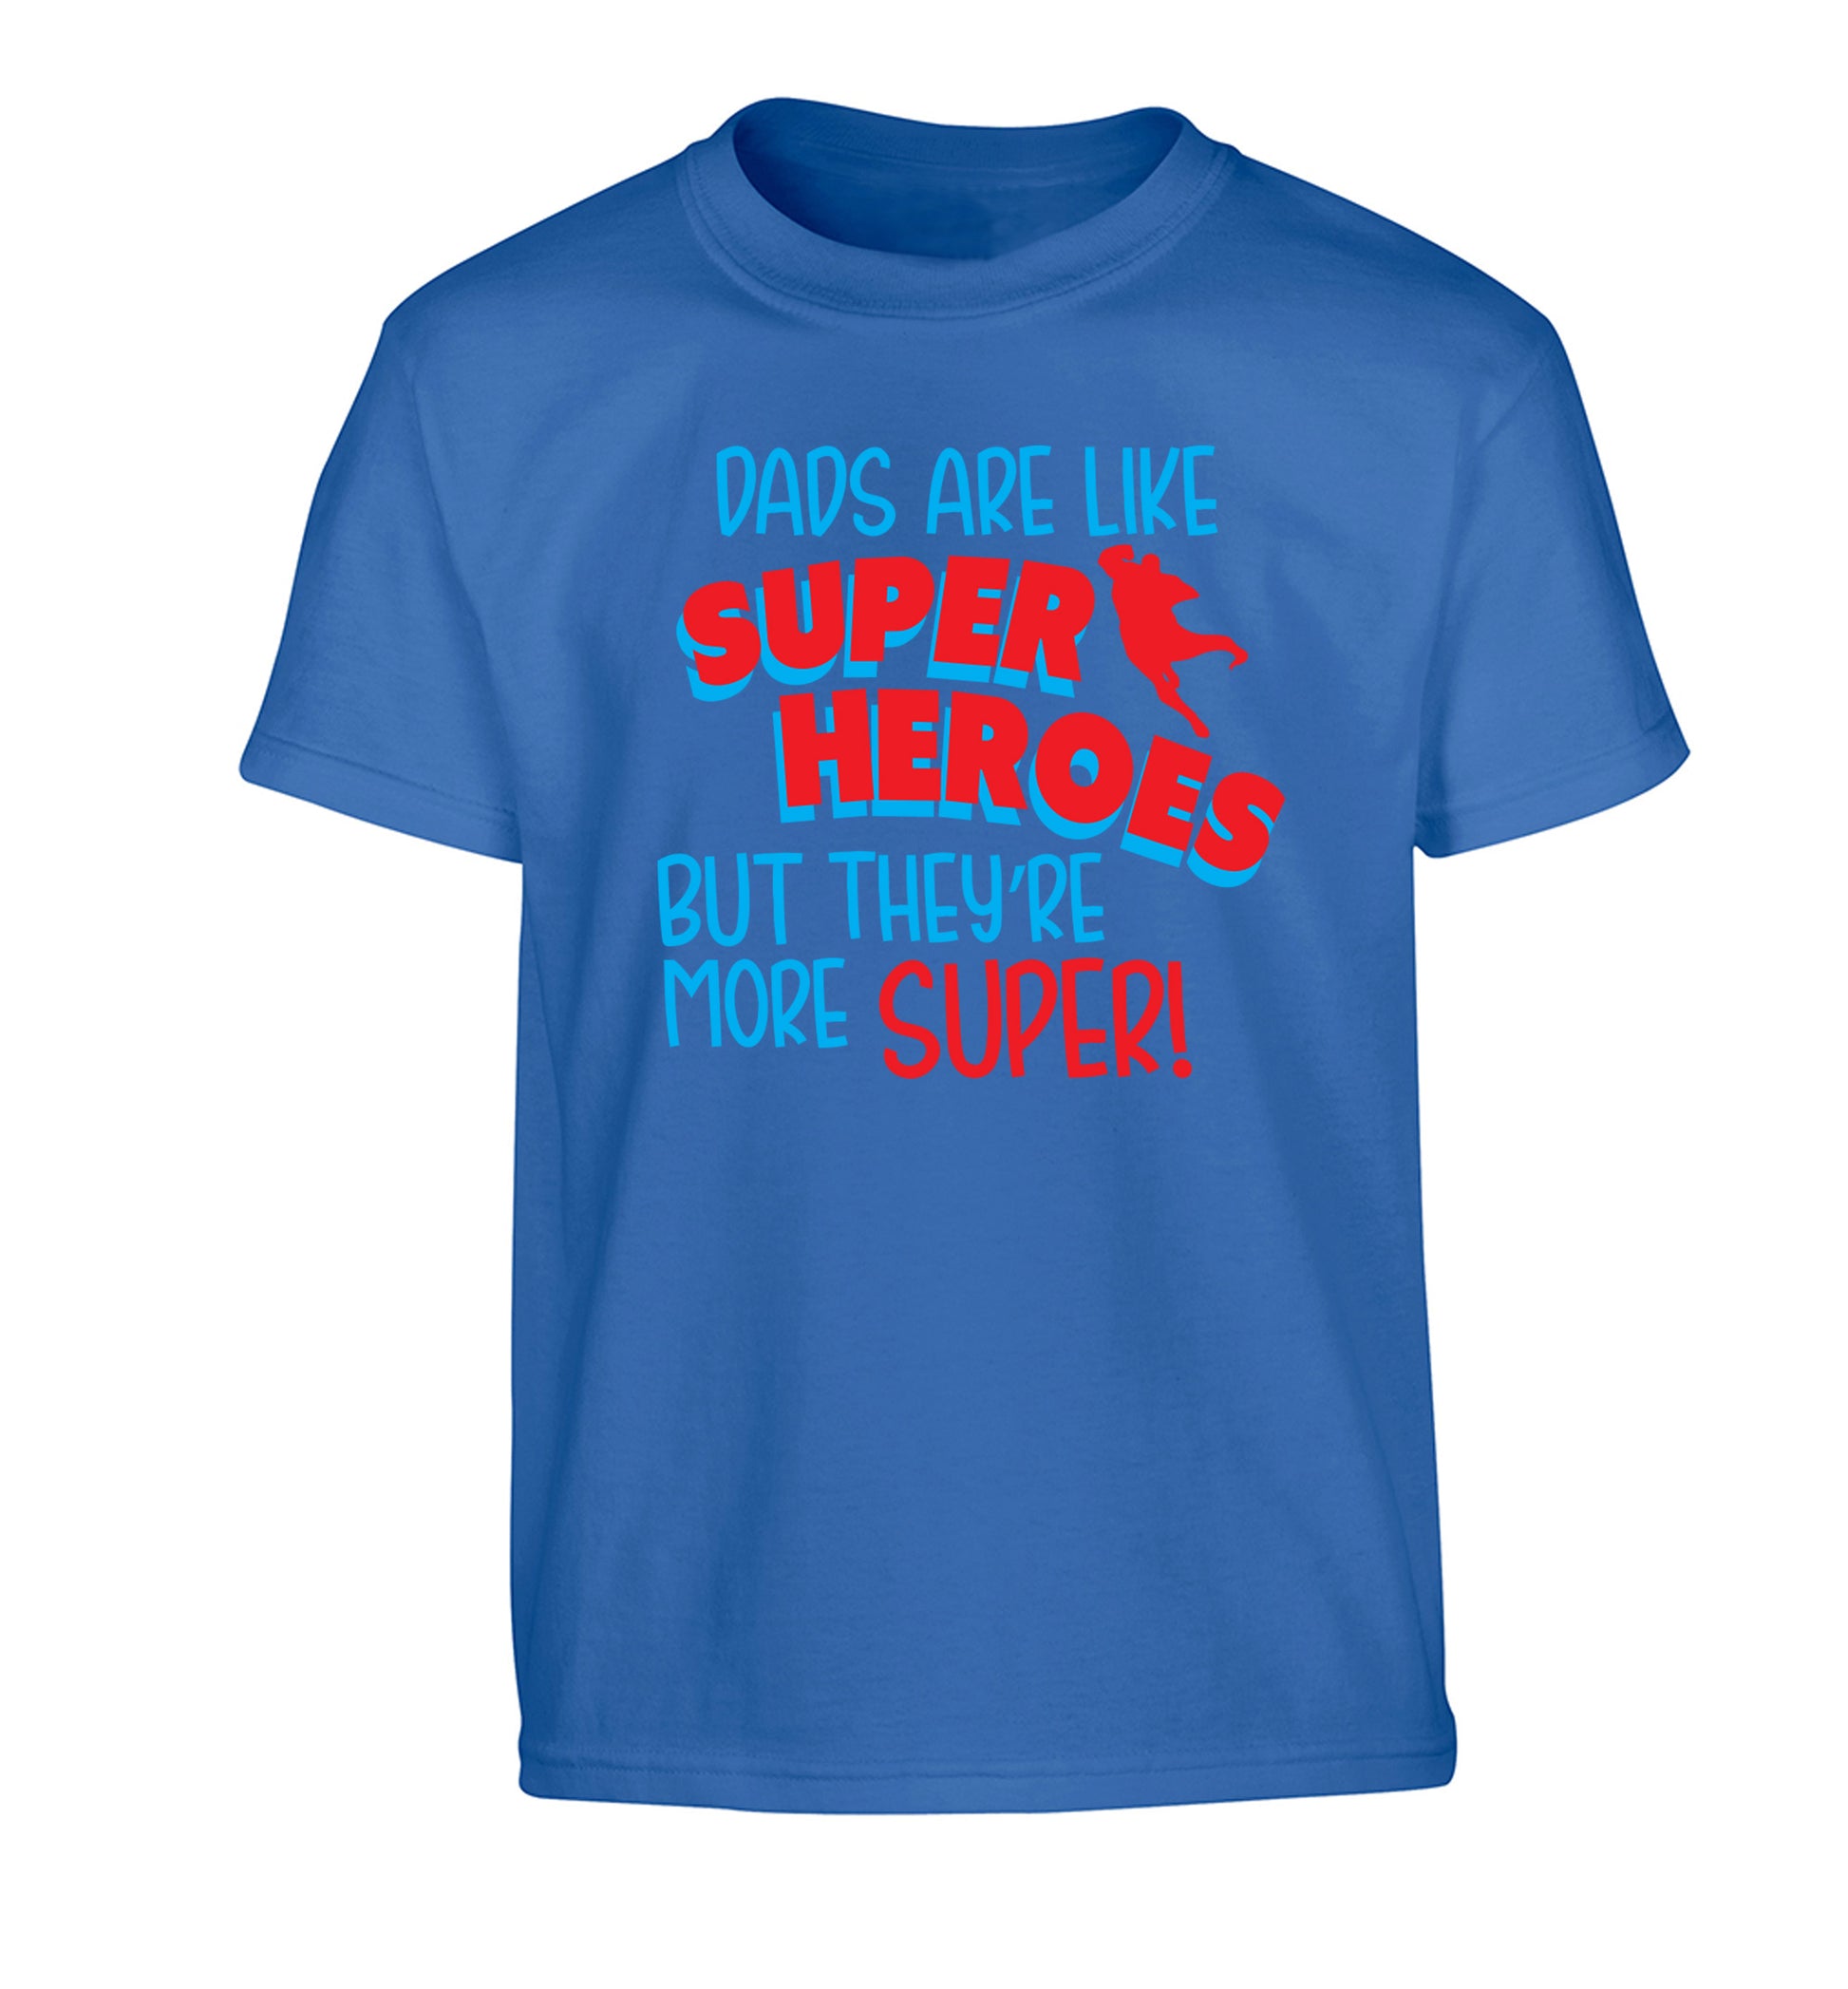 Dads are like superheros but they're more super Children's blue Tshirt 12-13 Years